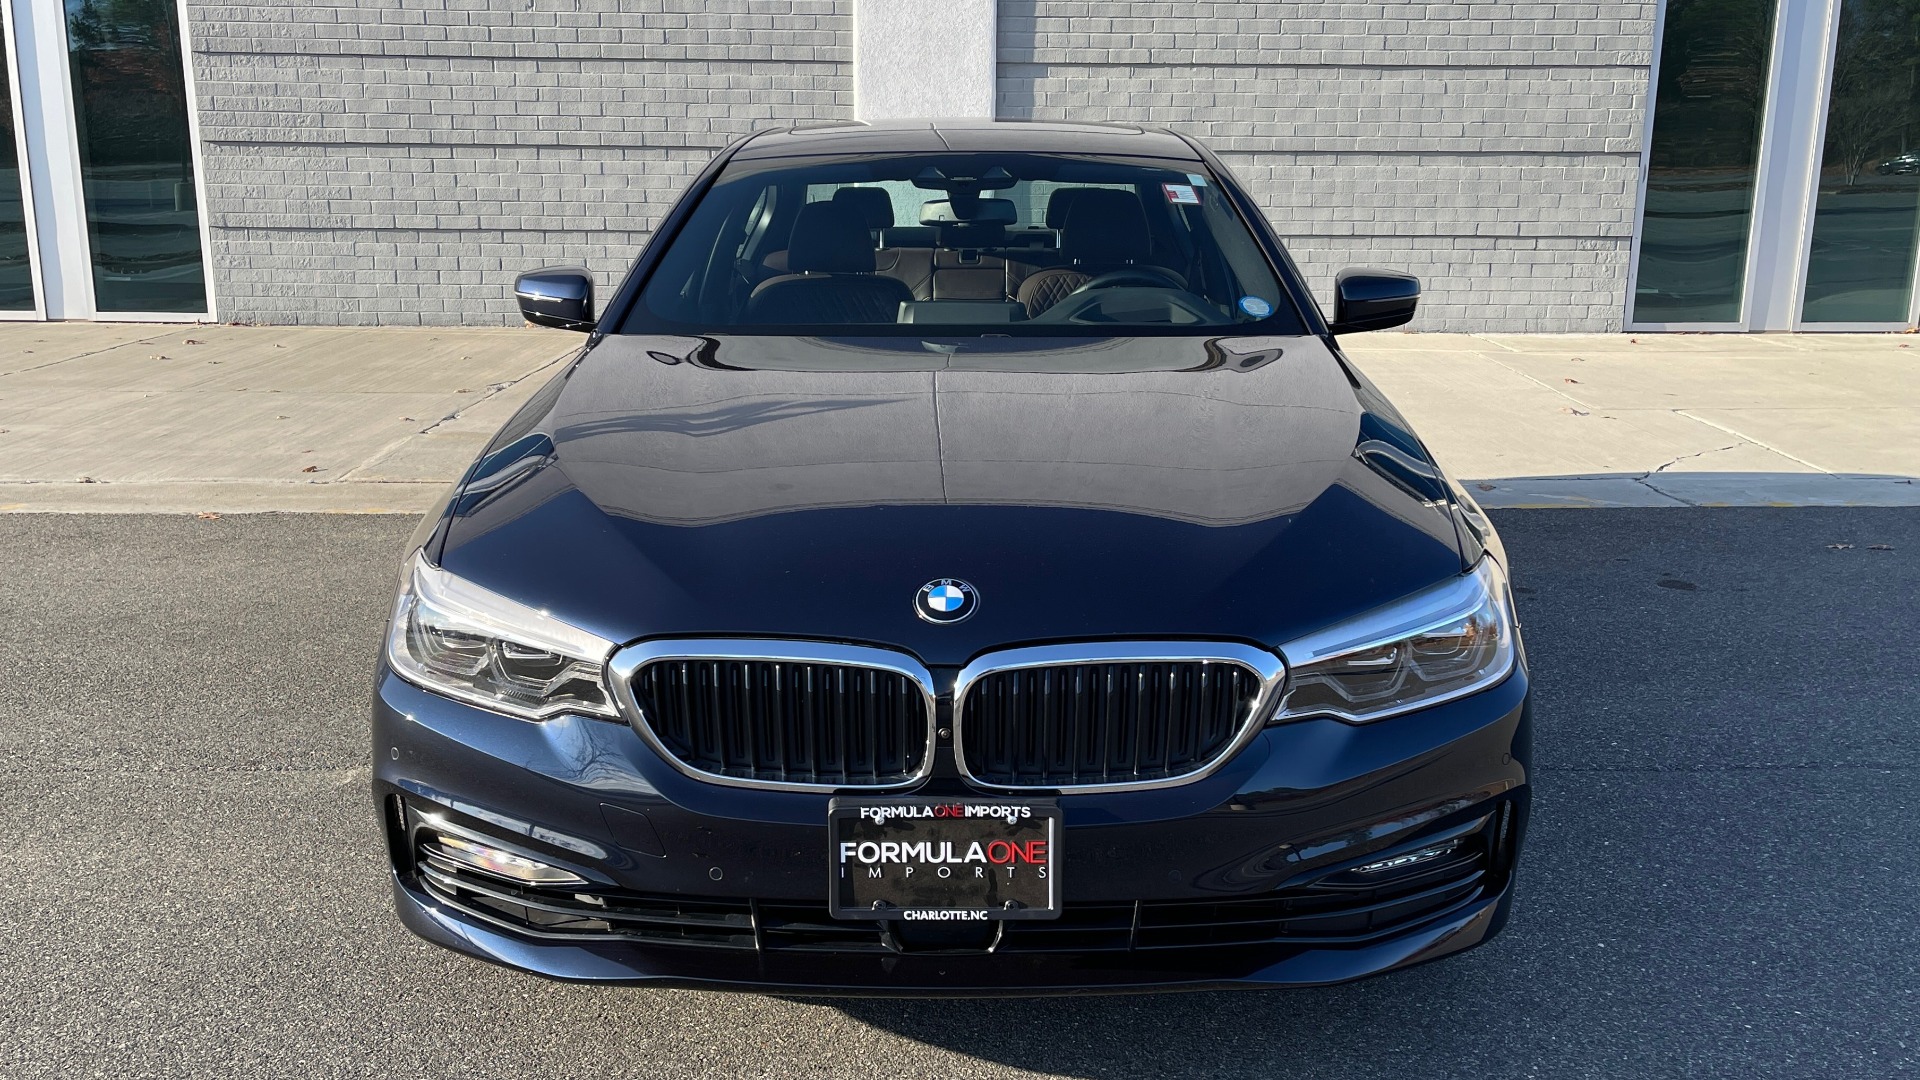 Used 2018 BMW 5 SERIES 530I XDRIVE PREMIUM / EXEC PKG / DRVR ASST PLUS / NAV / REARVIEW for sale Sold at Formula Imports in Charlotte NC 28227 7